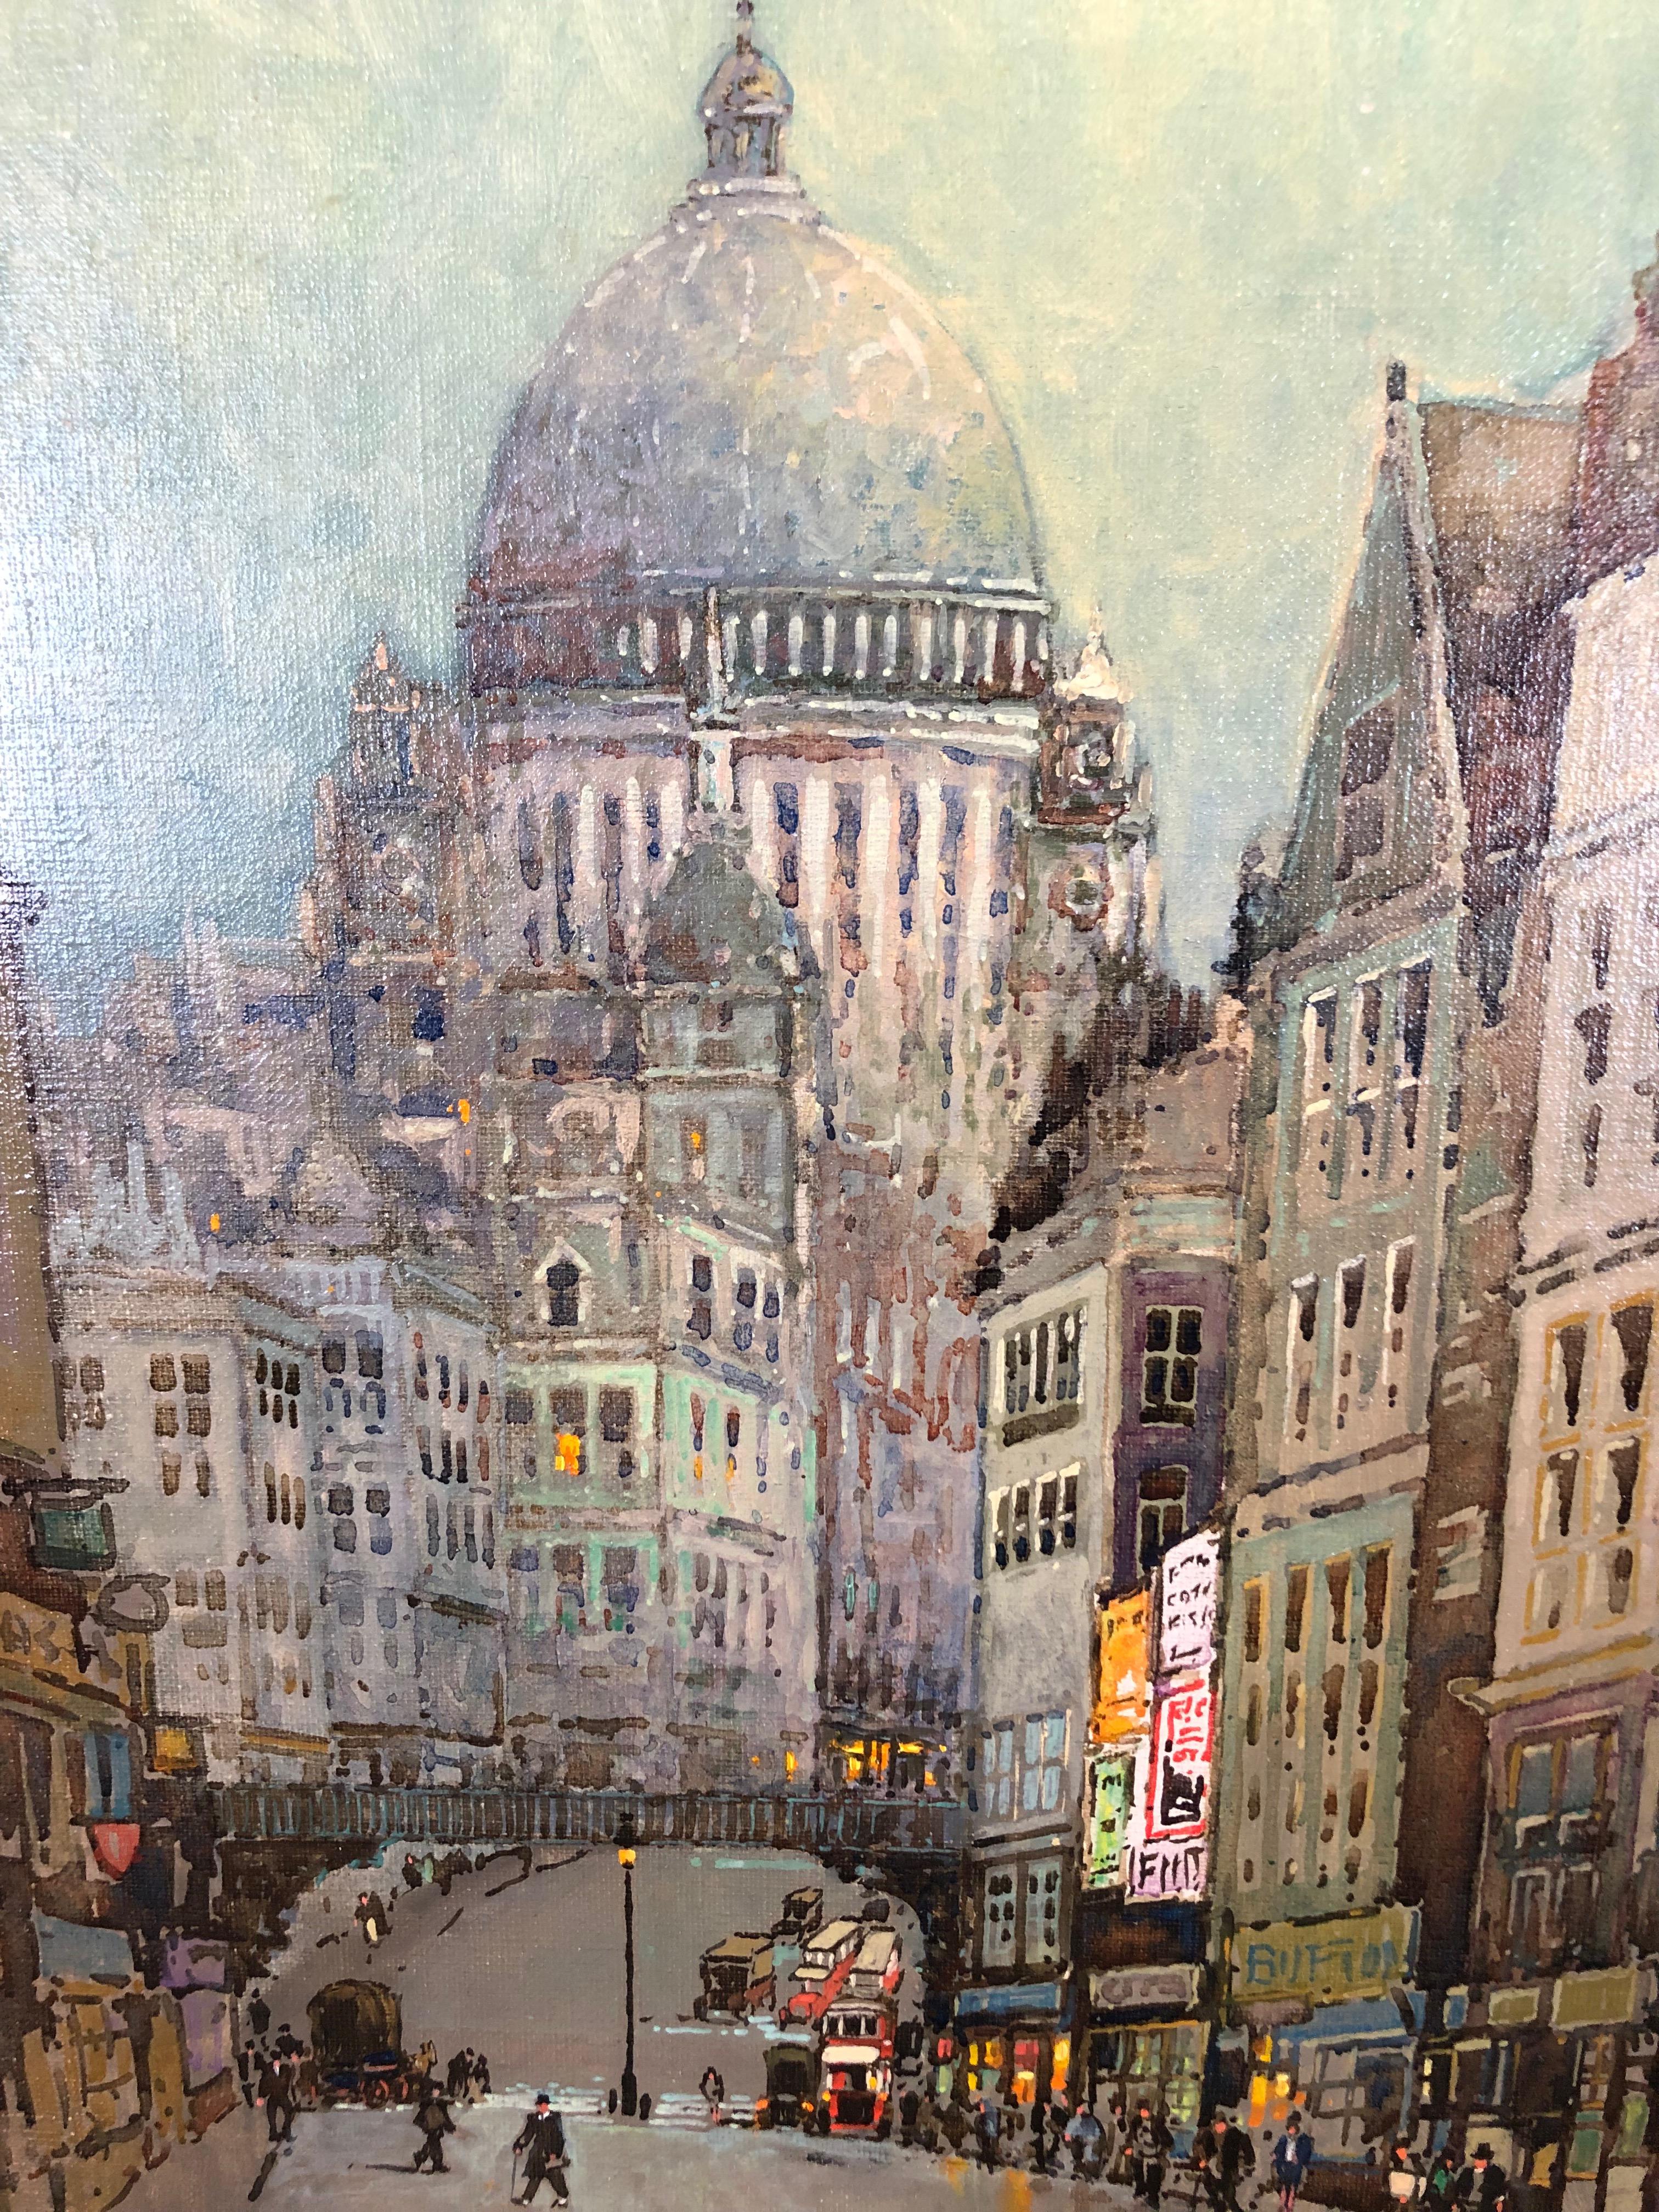 Charming London Townscape Of Ludgate Hill leading up to St Pauls Cathedral in which the artist has managed to capture both the fun and general busy London atmosphere. Godwin Bennett 1888-1950 was a Brighton born painter and art dealer who enjoyed